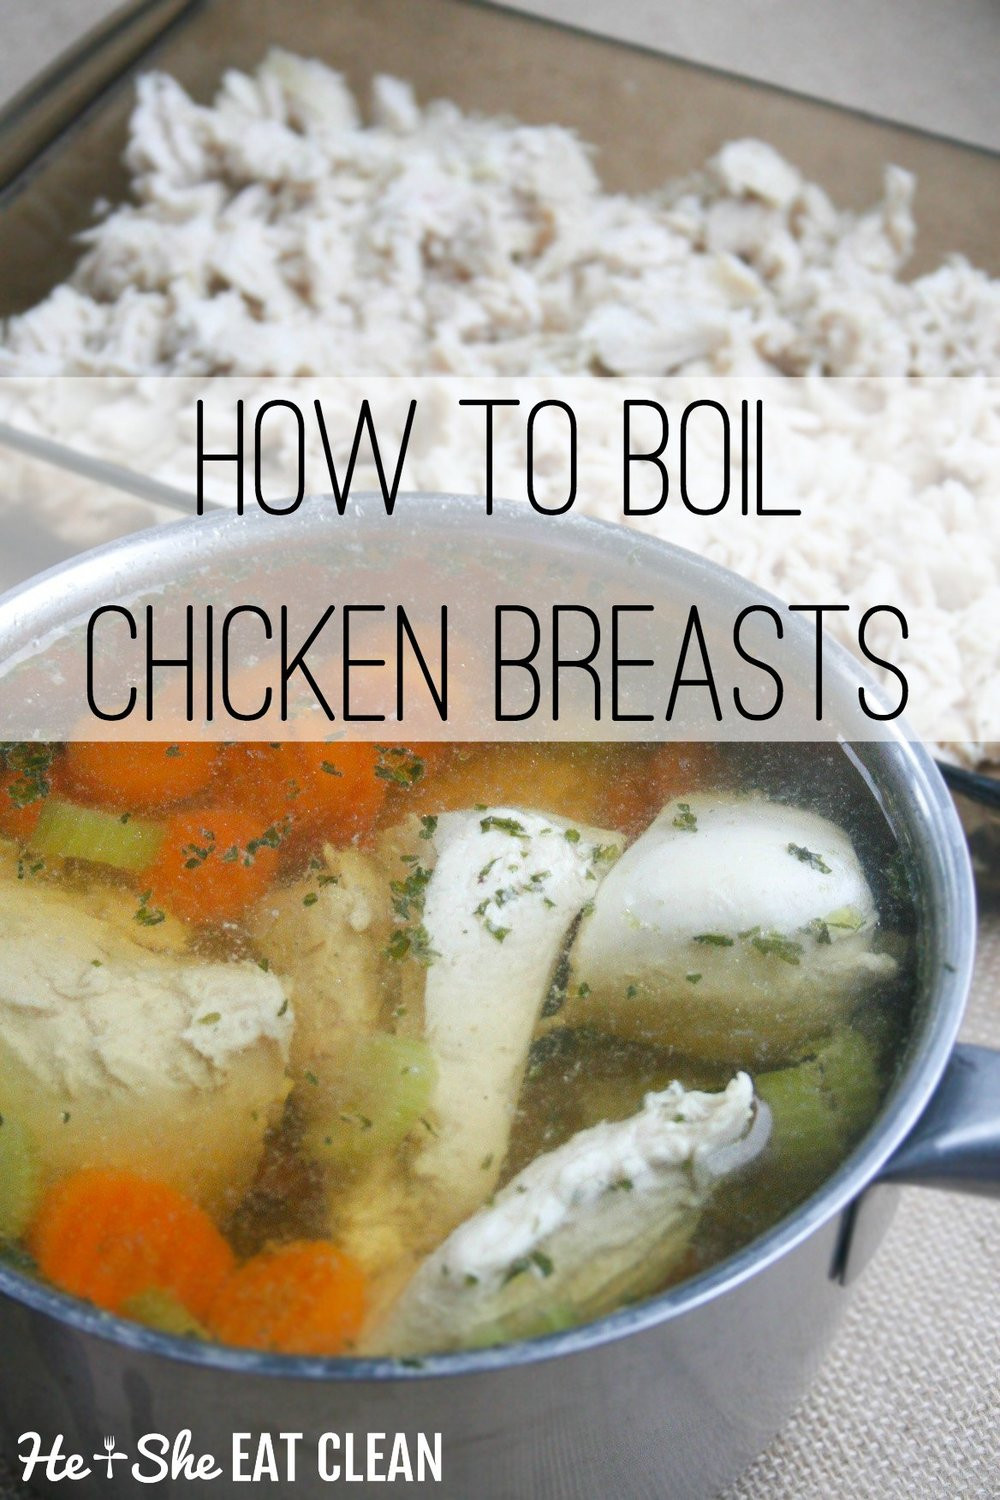 Boil Chicken Breasts
 How to Boil Chicken Breasts